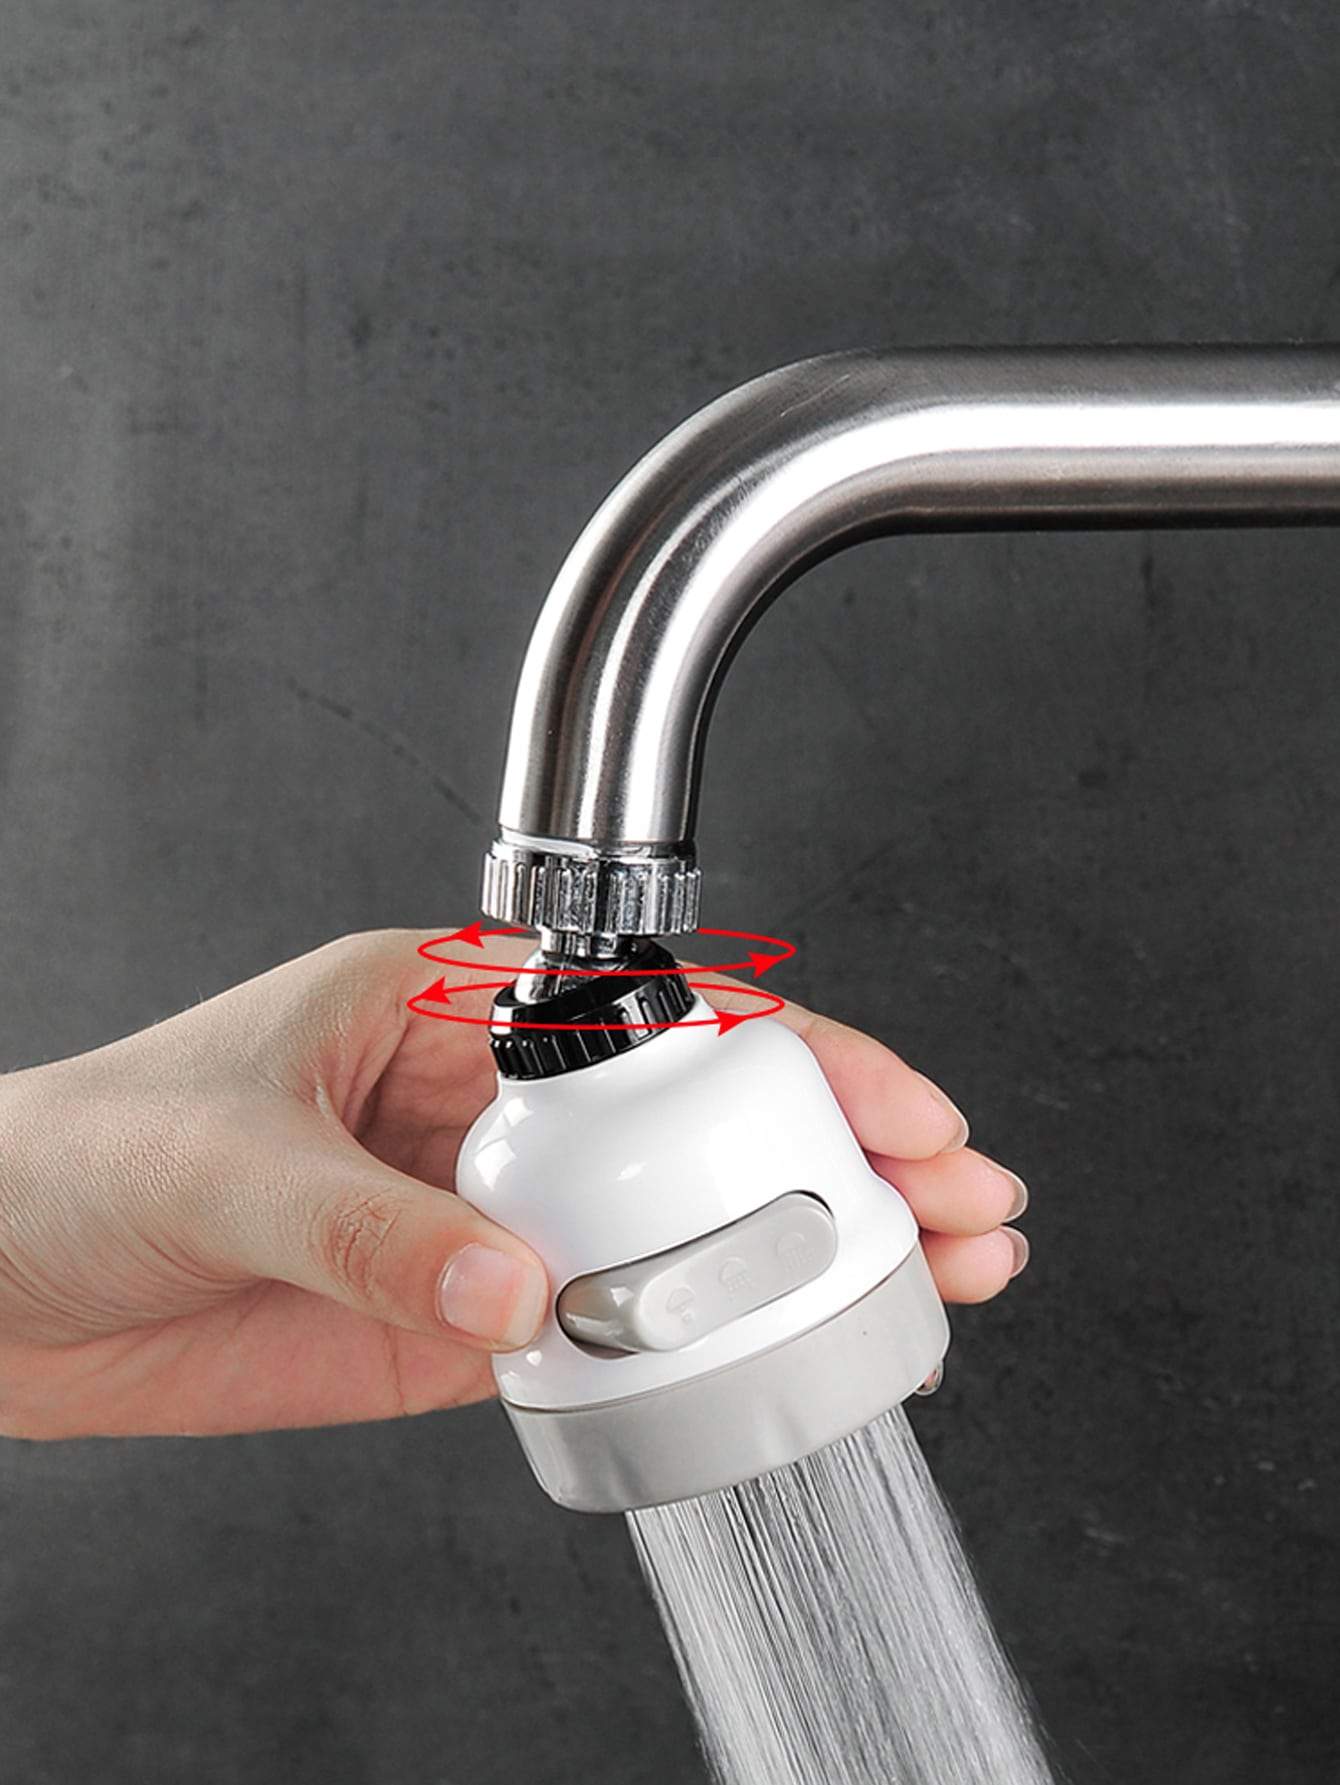 1pc Stainless Steel White Adjustable Faucet Filter